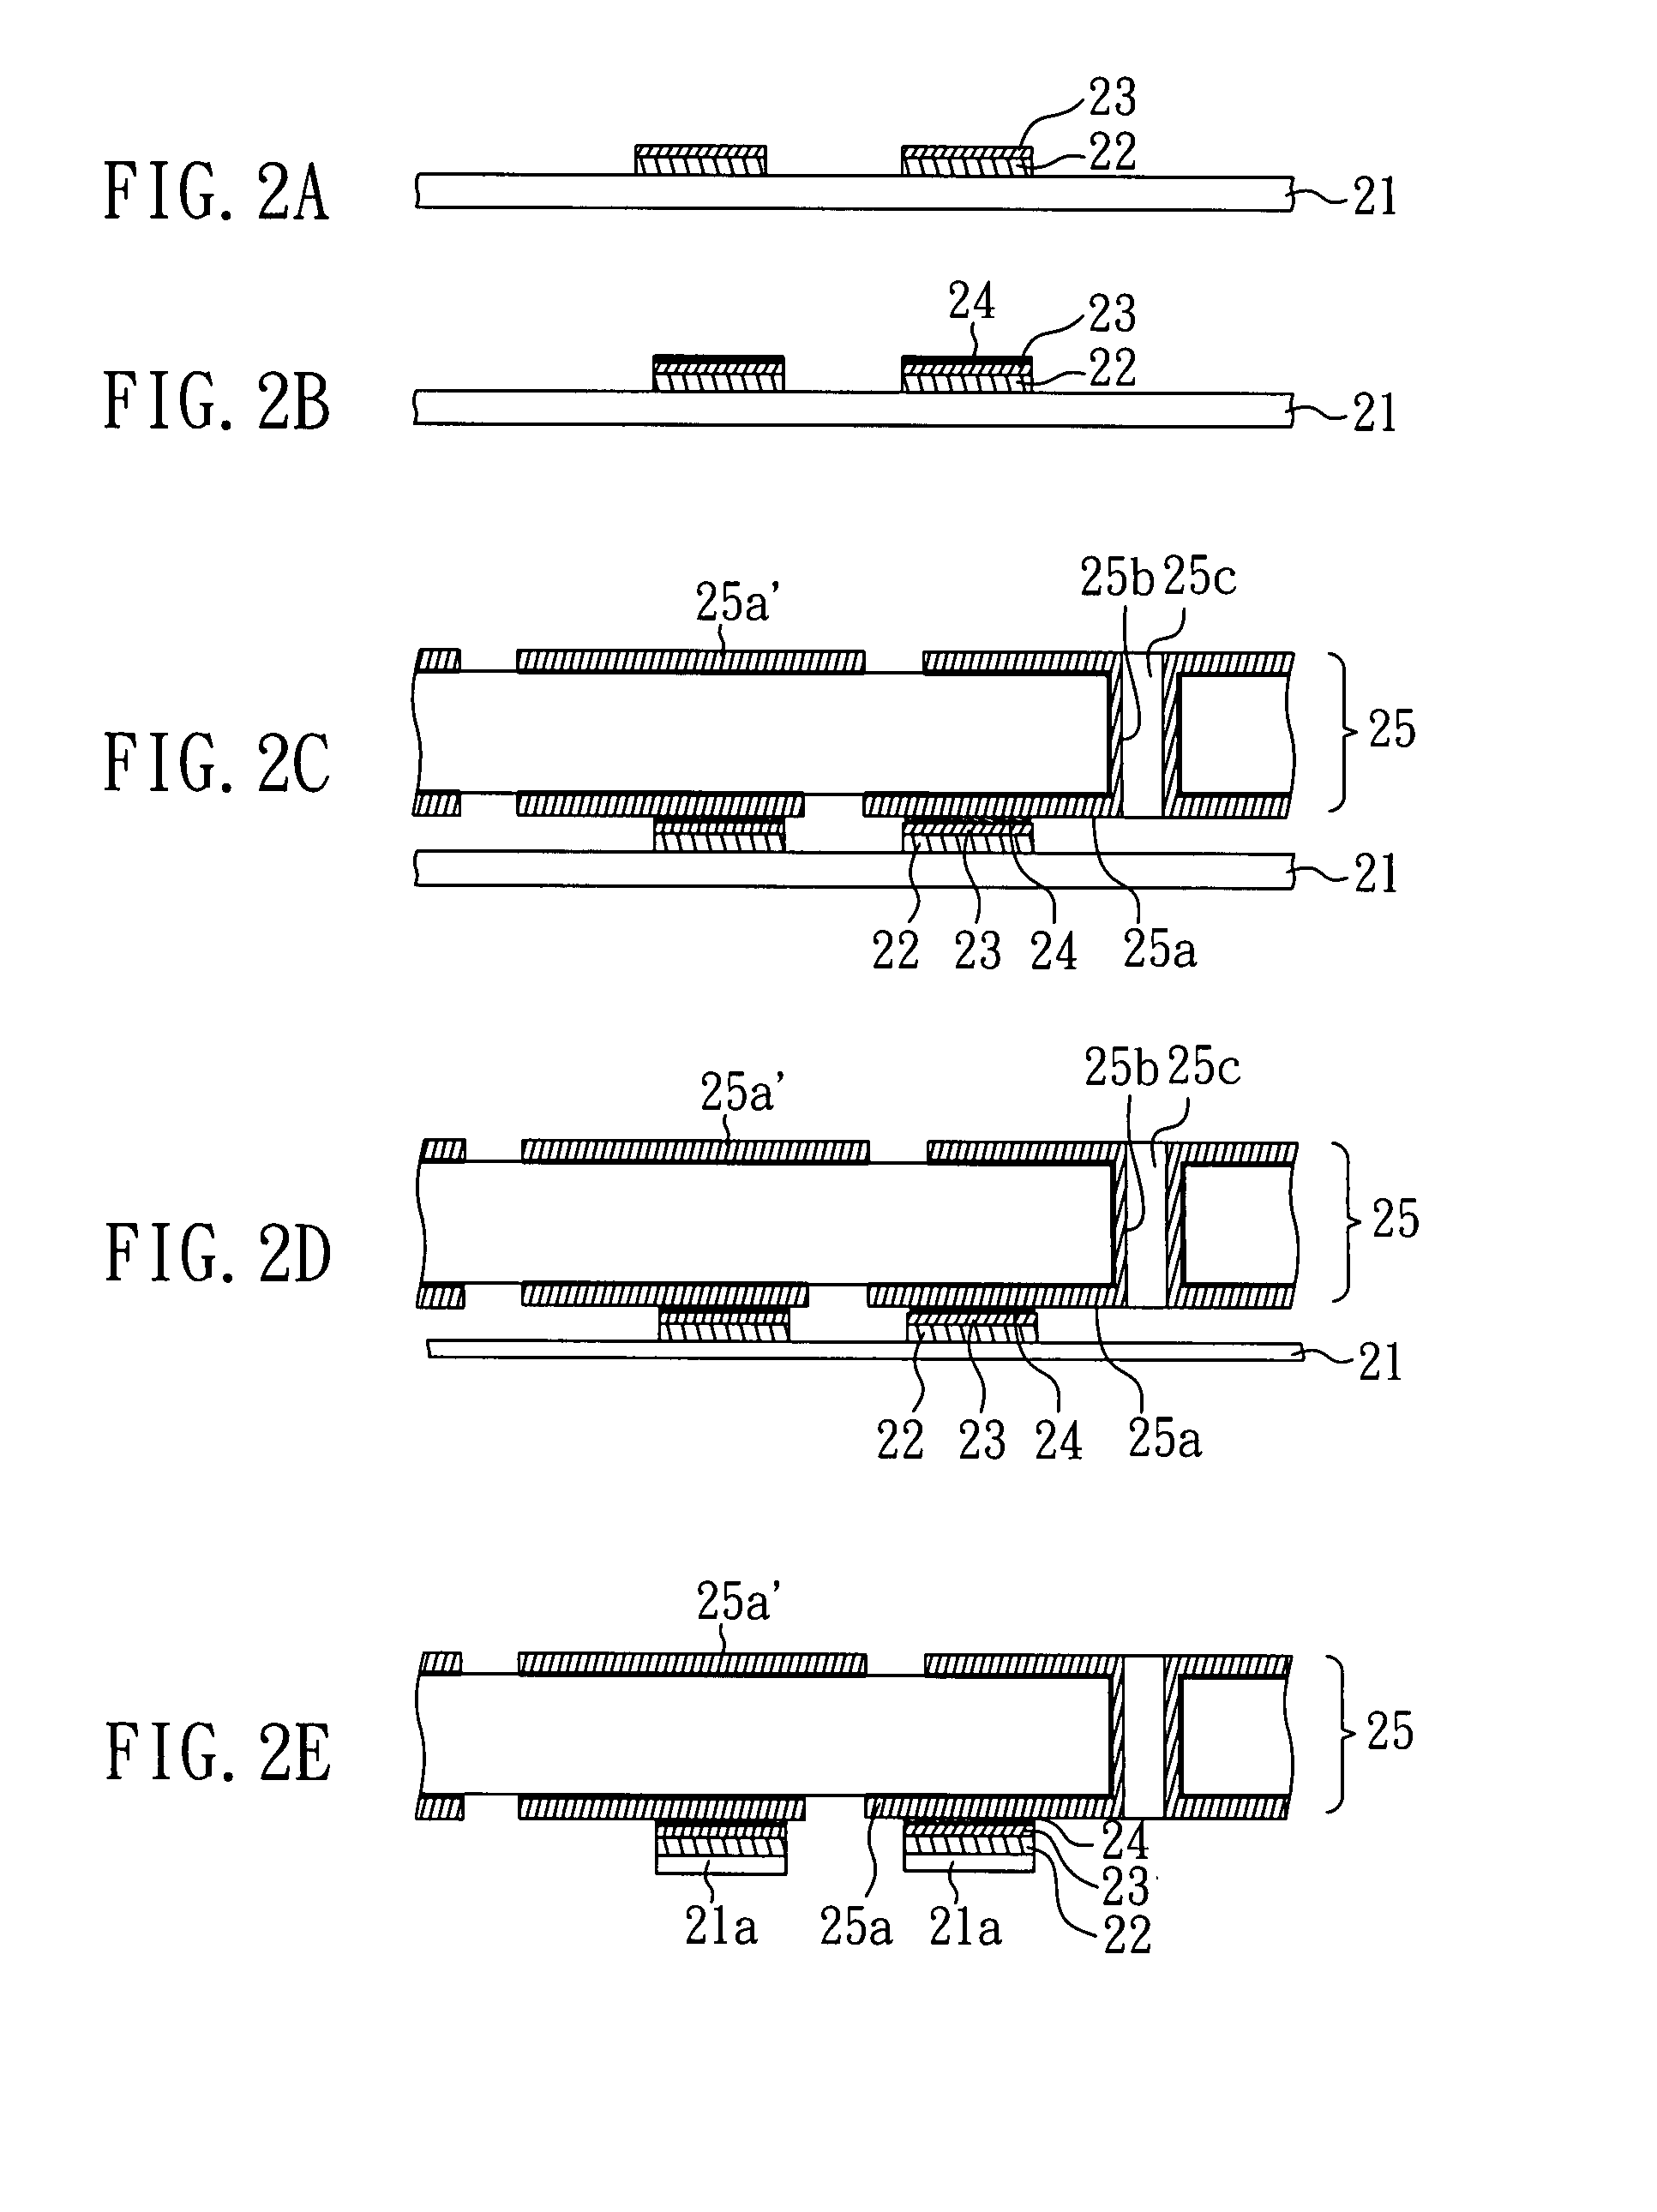 Structure of packaging substrate having capacitor embedded therein and method for fabricating the same